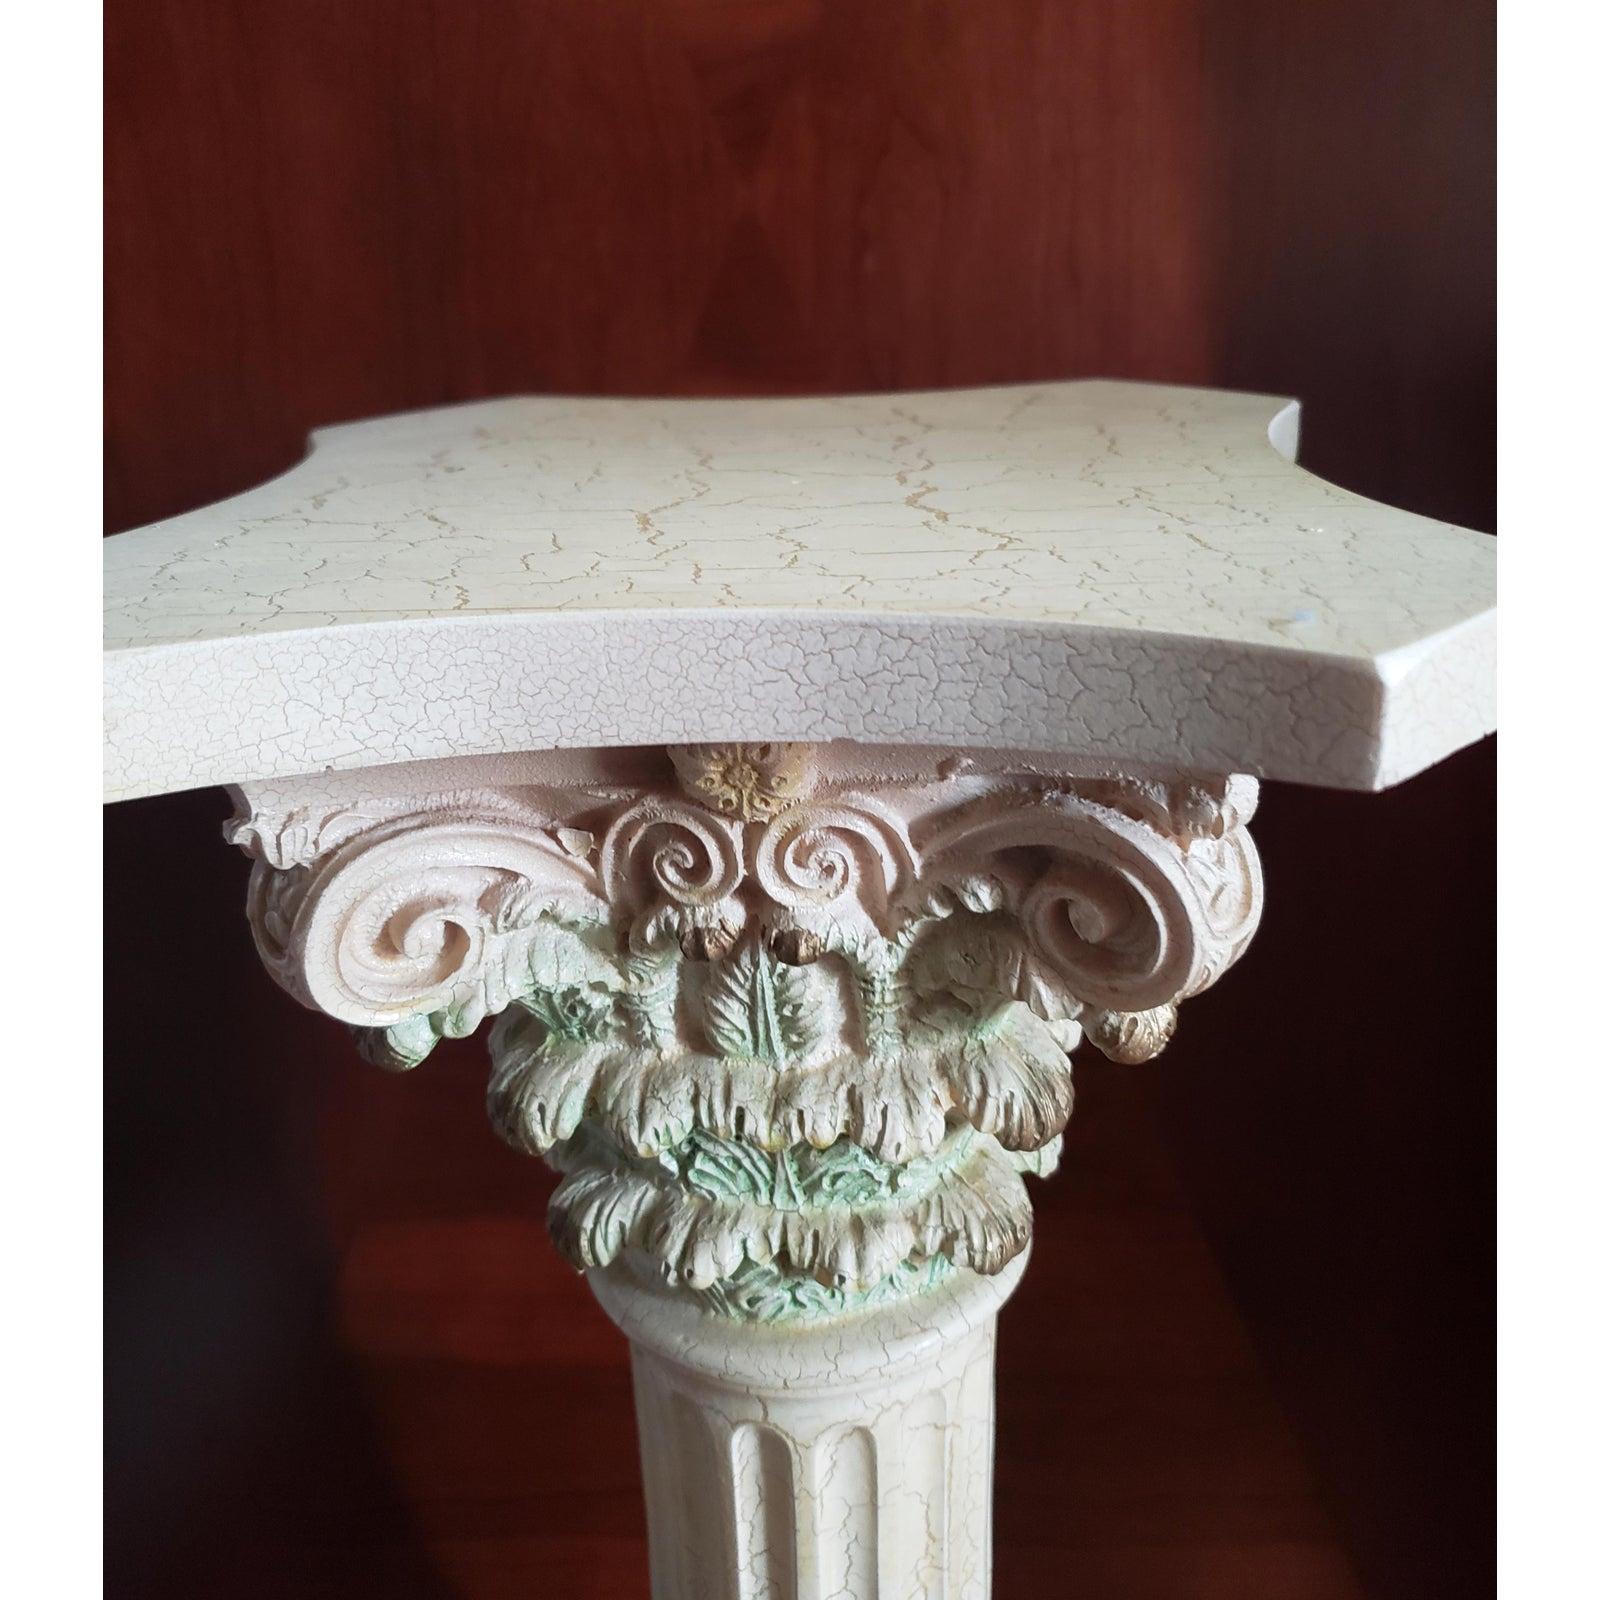 This exclusive roman / corinthian resin pedestal is designed to grace the luxurious rooms of an English manor and whispers pure elegance. The roman / corinthian style is embellished with an intricately carved top and acanthus leaves top part, cast